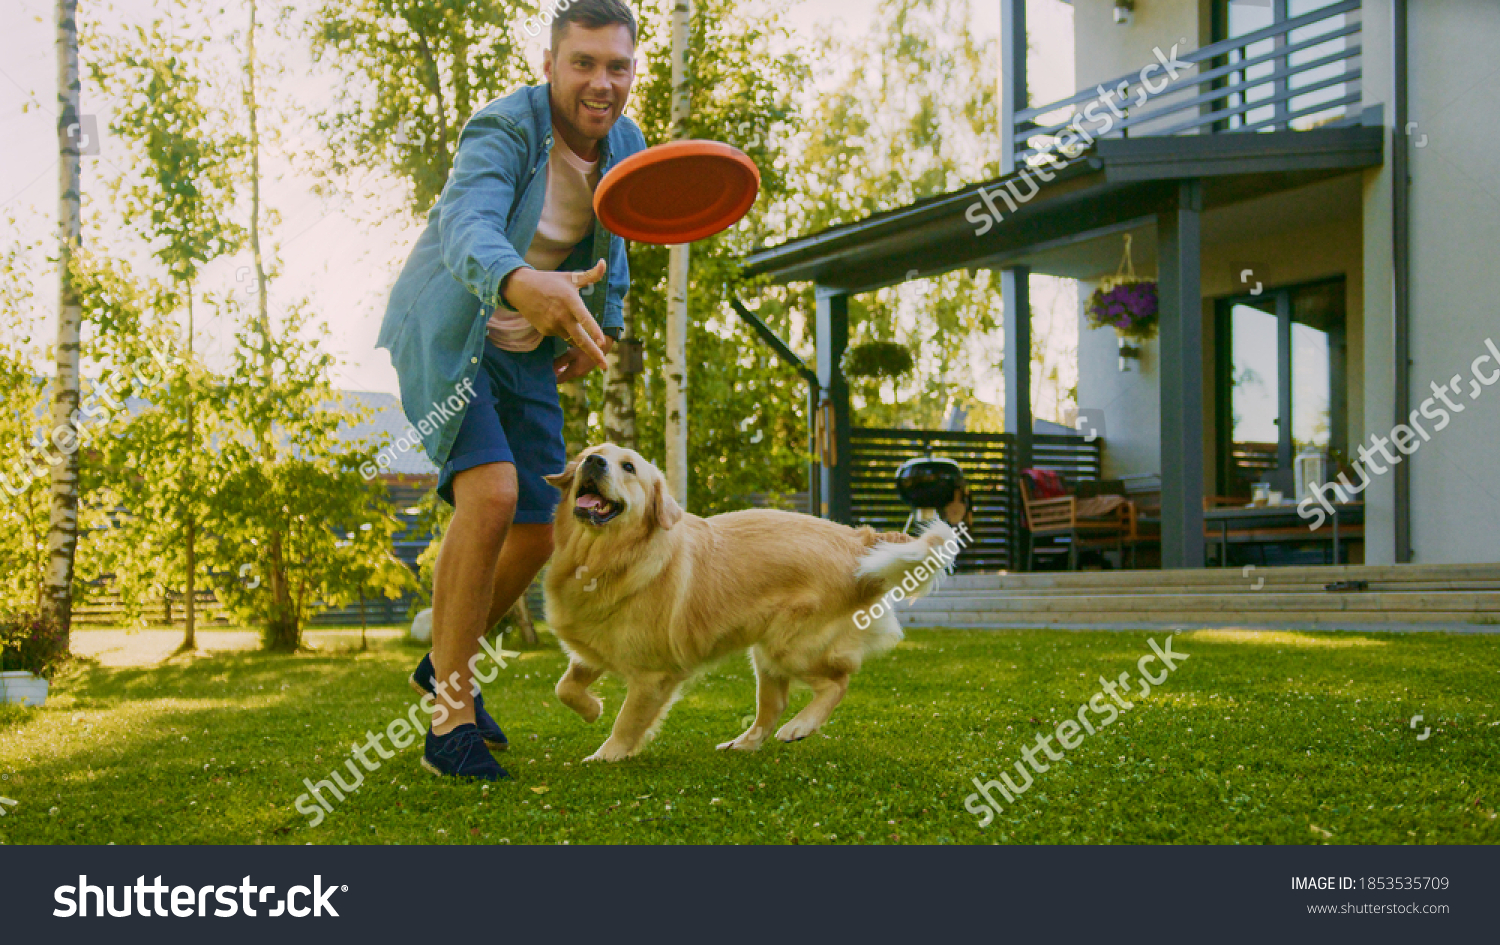 Handsome Man Plays Catch flying disc with Happy Golden Retriever Dog on the Backyard Lawn. Man Has Fun with Loyal Pedigree Dog Outdoors in Summer House Backyard. #1853535709